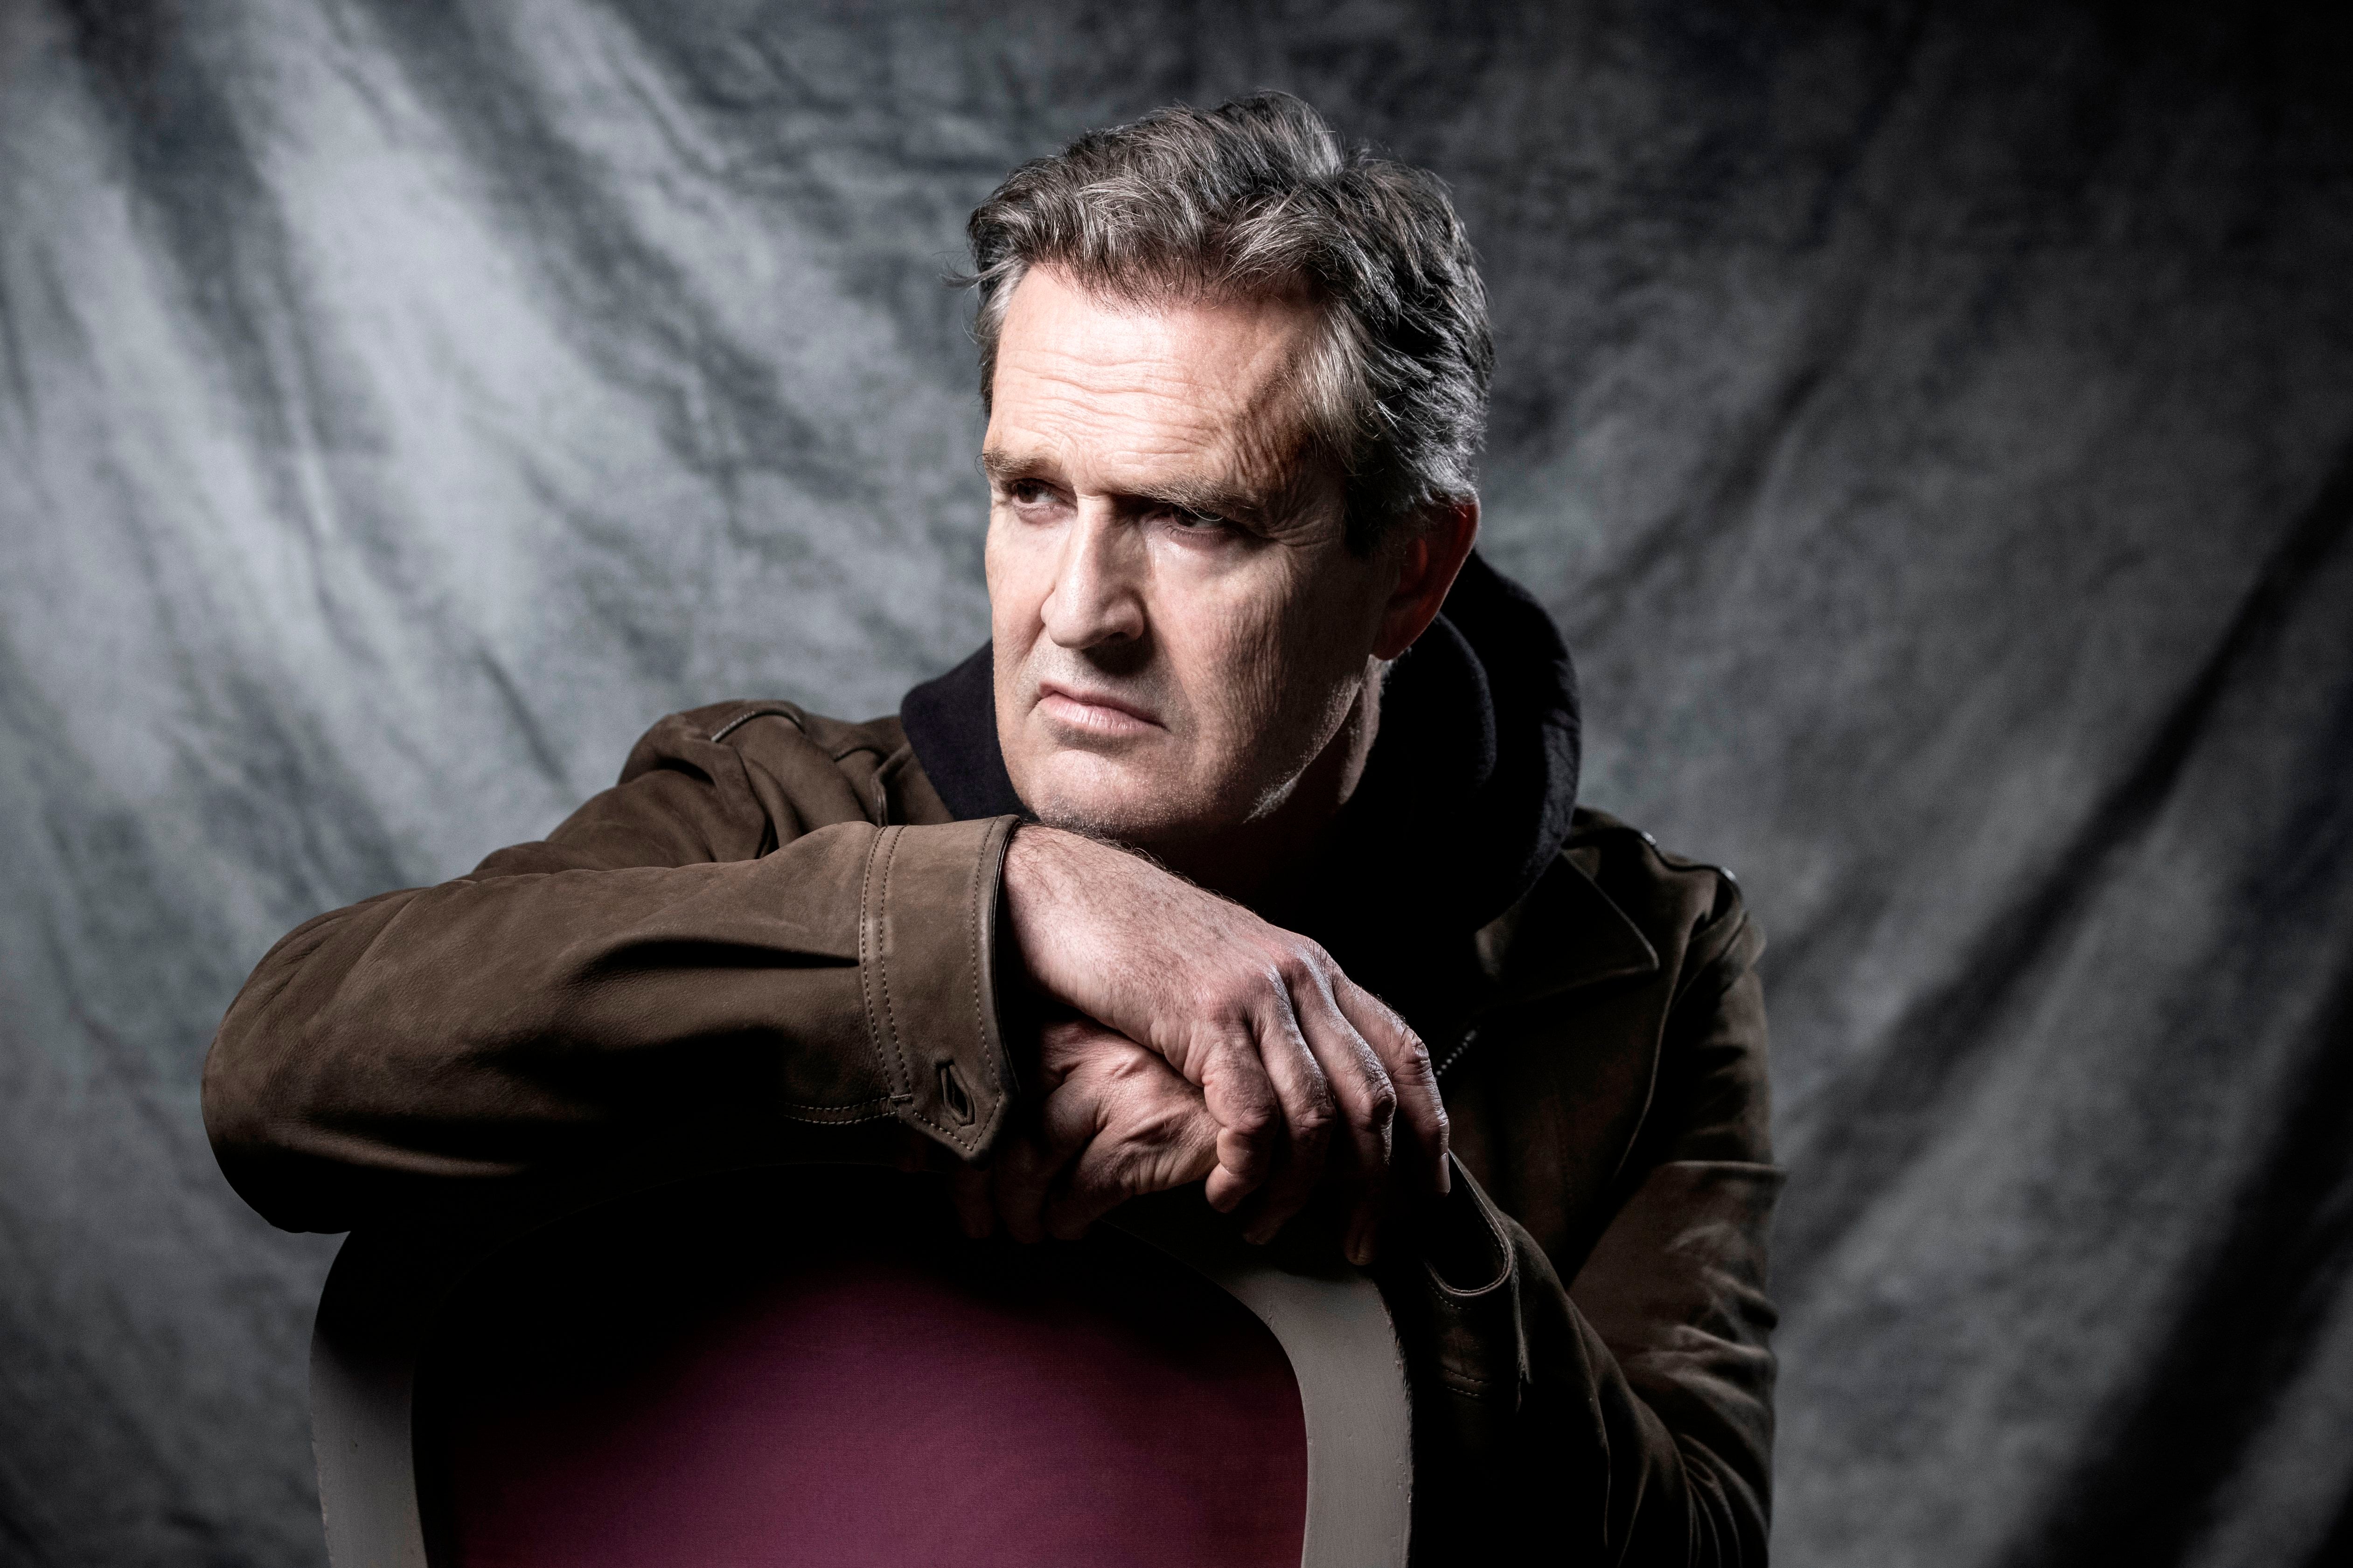 Rupert Everett is still the undisputed master of the politically